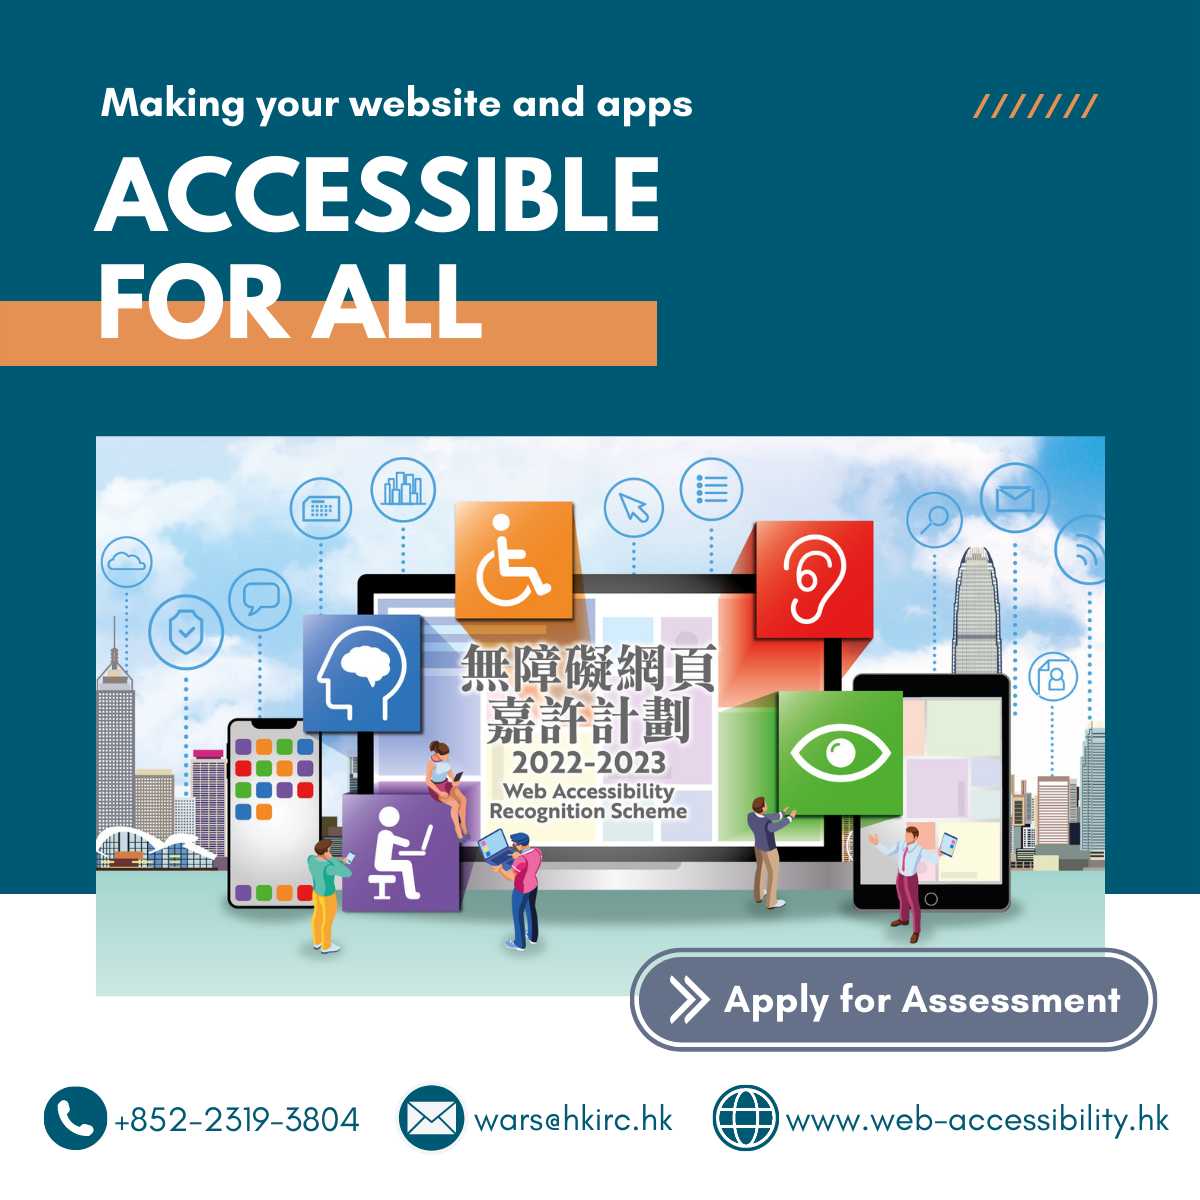 Making your websites and mobile apps accessible for all